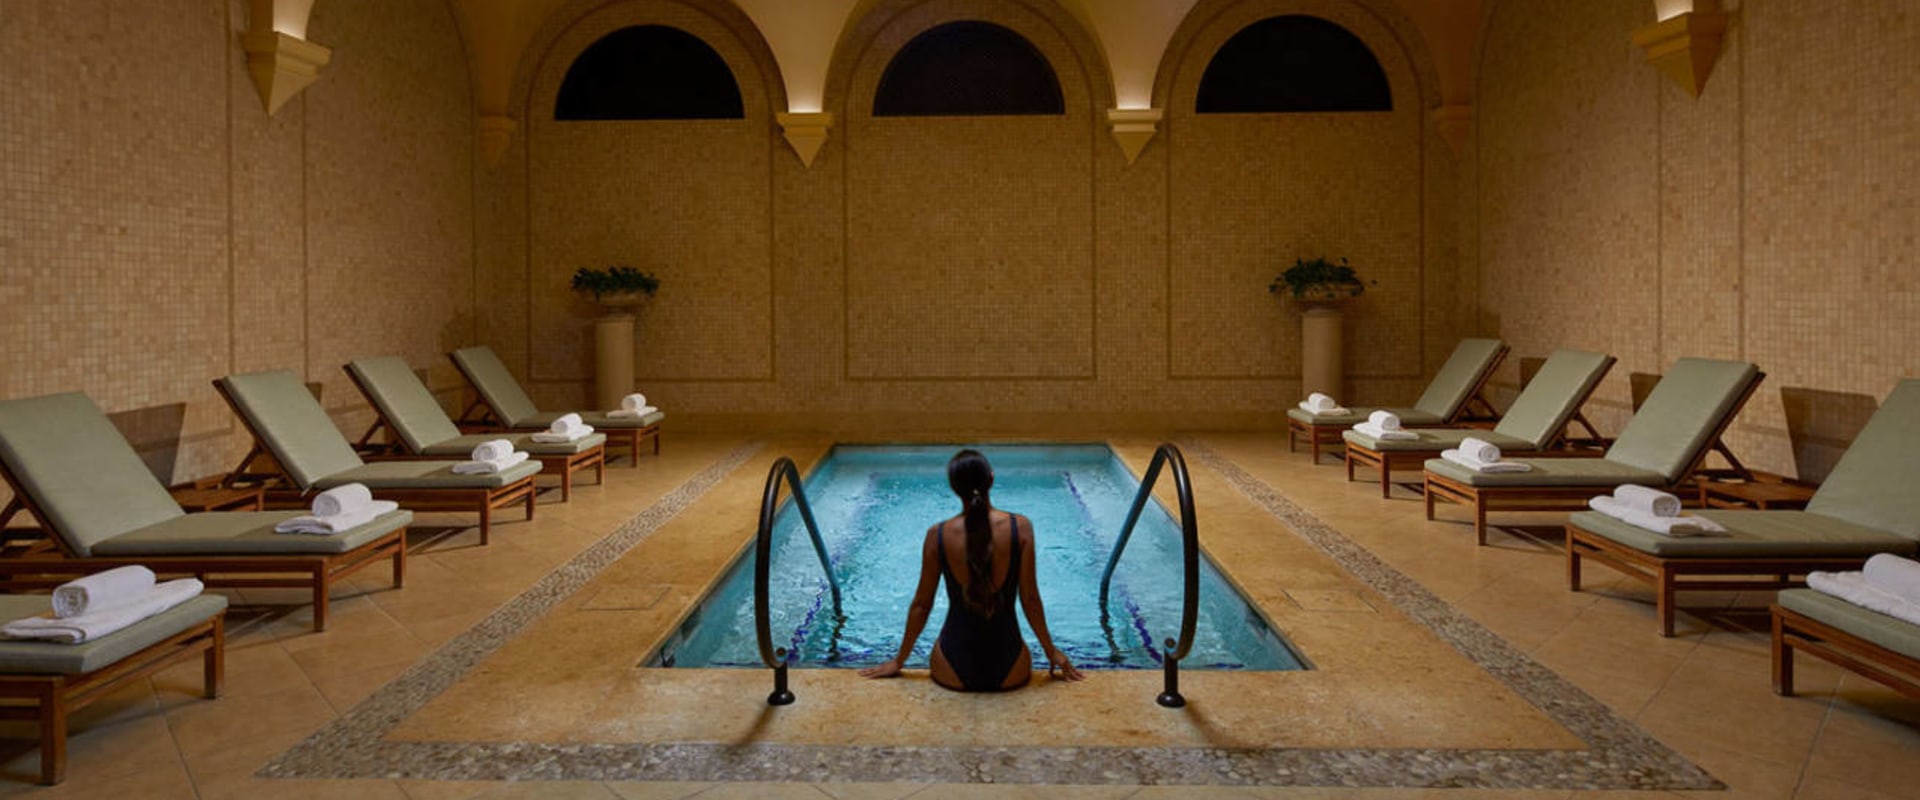 The Resort at Pelican Hill: A Comprehensive Look at One of Los Angeles's Best Spas